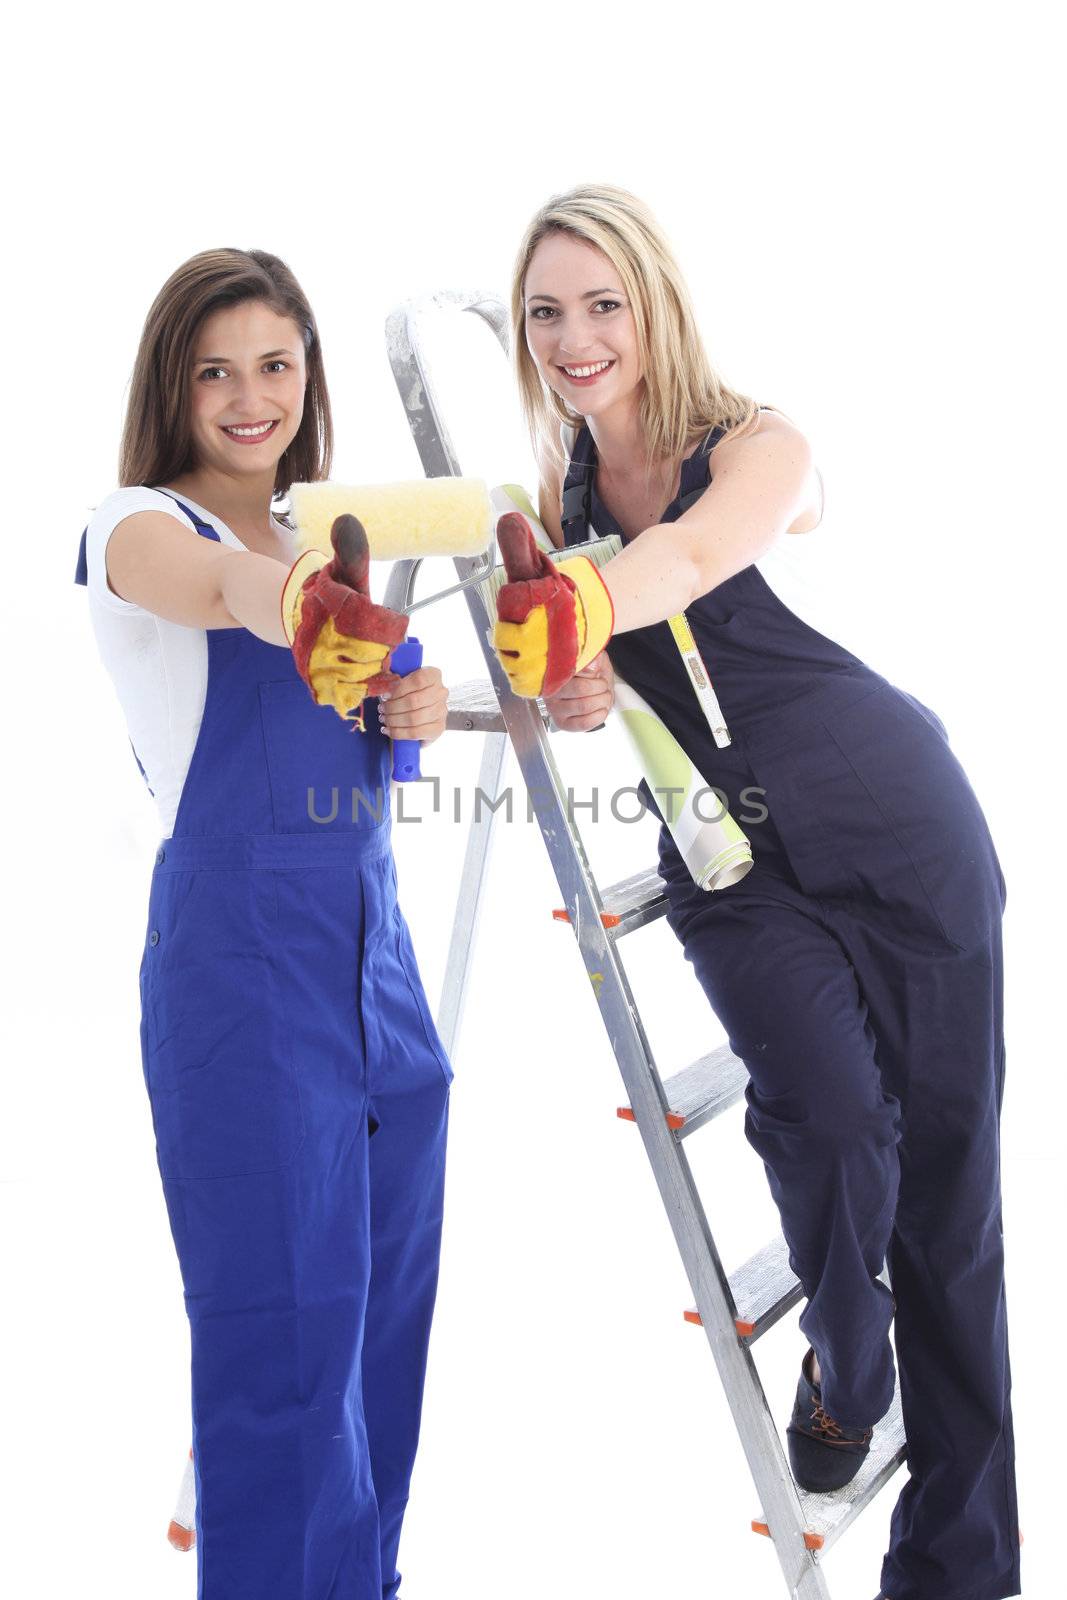 Two happy women dressed in dungarees and safety gloves give a thumbs up for the benefits of teamwork in hanging wallpaper and redecorating 